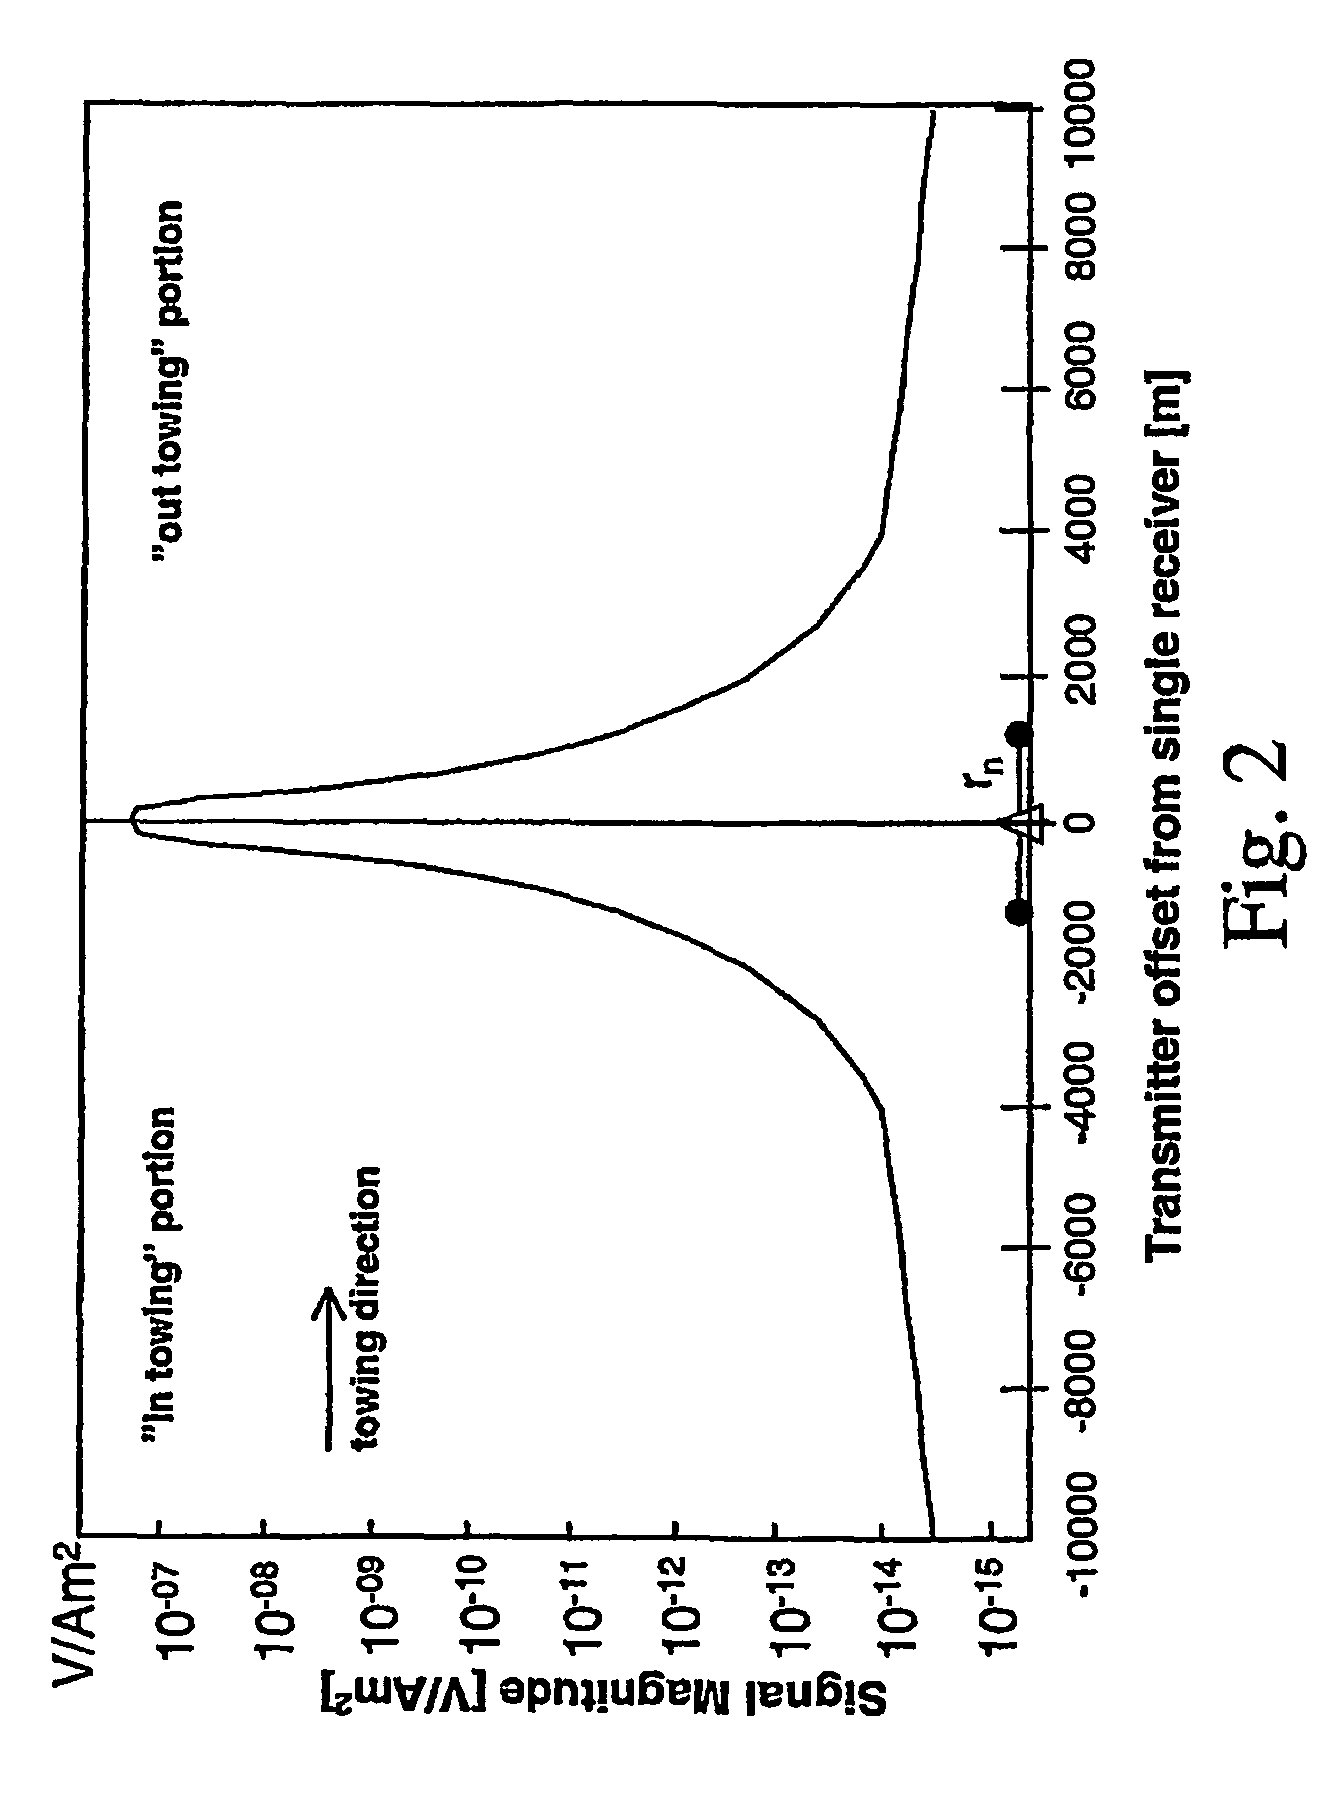 Method for electromagnetic geophysical surveying of subsea rock formations